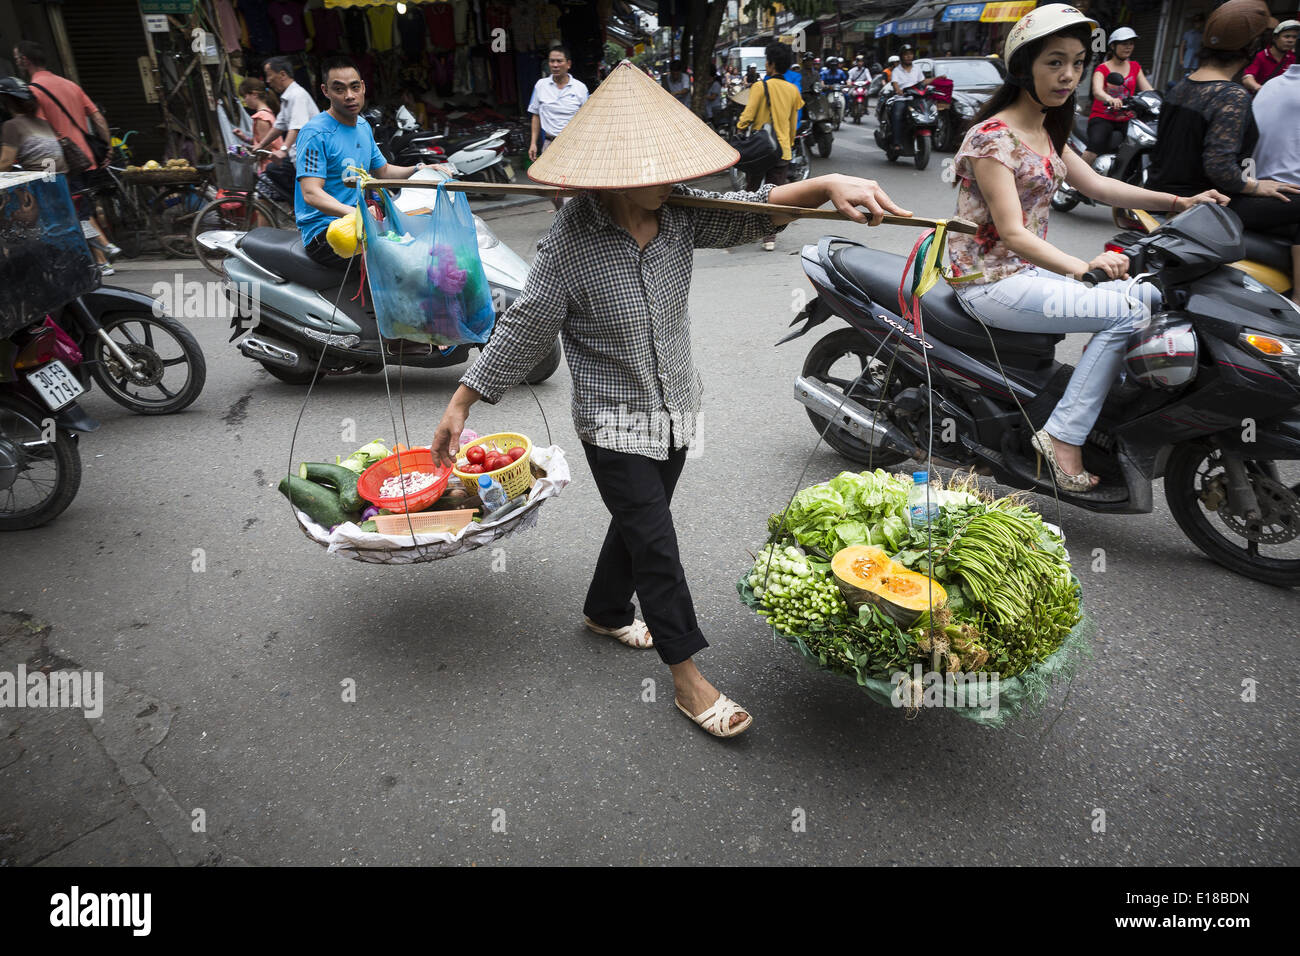 A vegetable vendor across the street loaded with wares for sale. Stock Photo